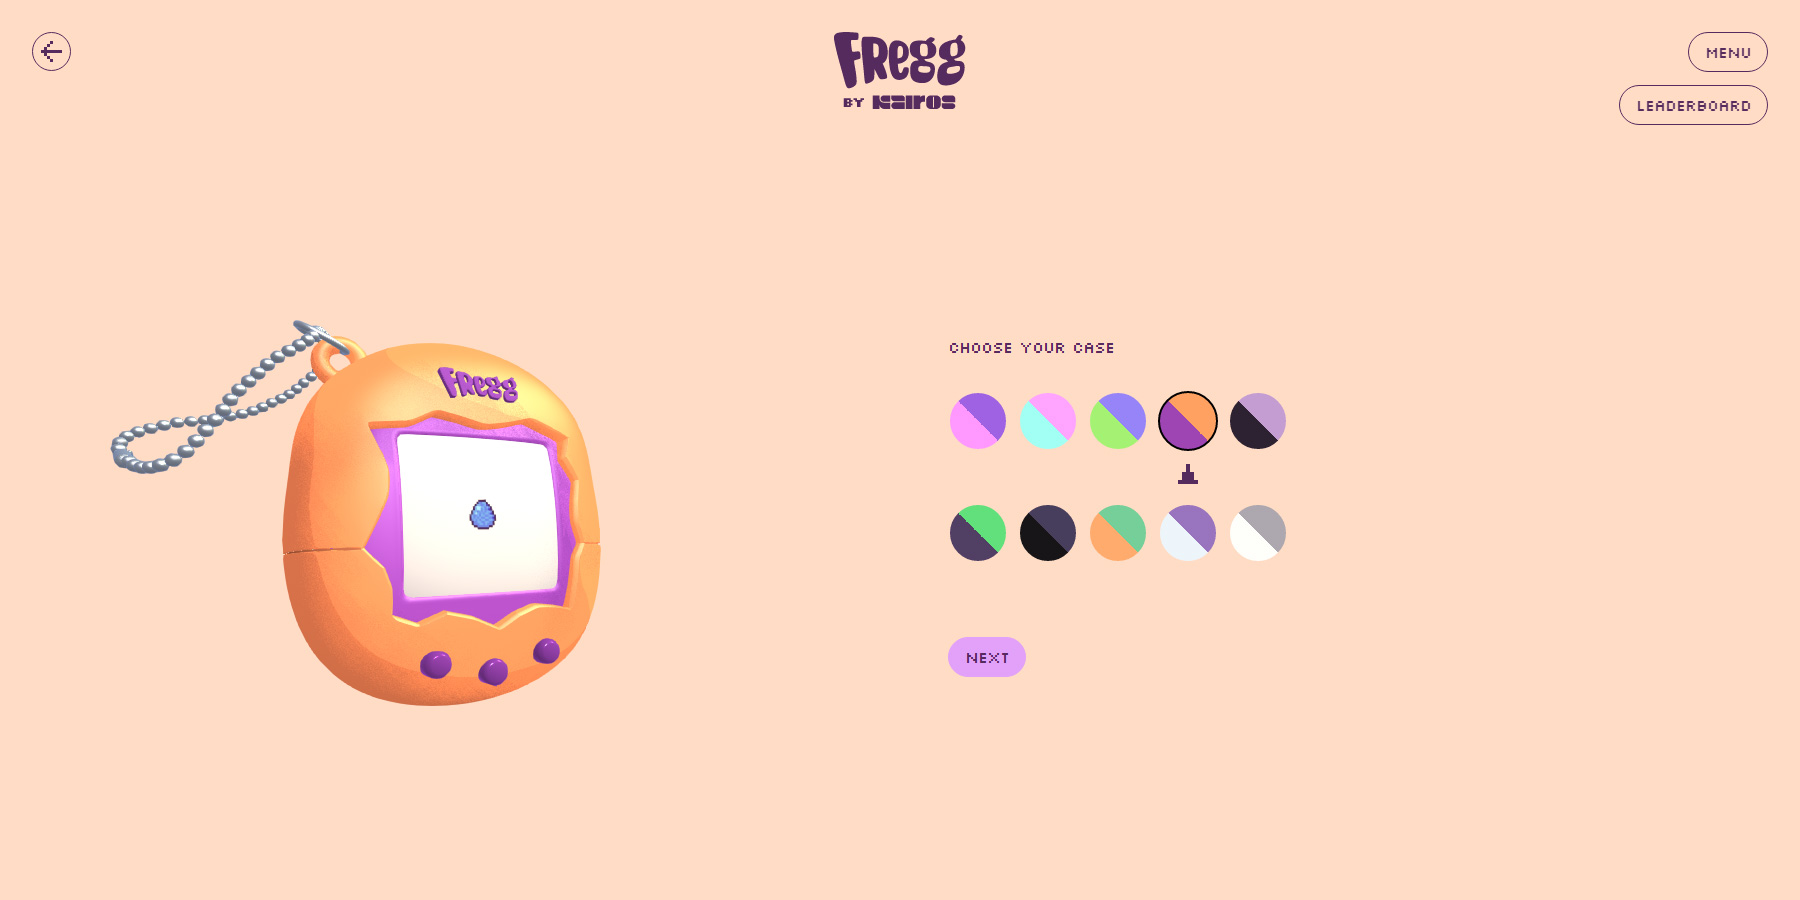 Fregg by Kairos - Website of the Day